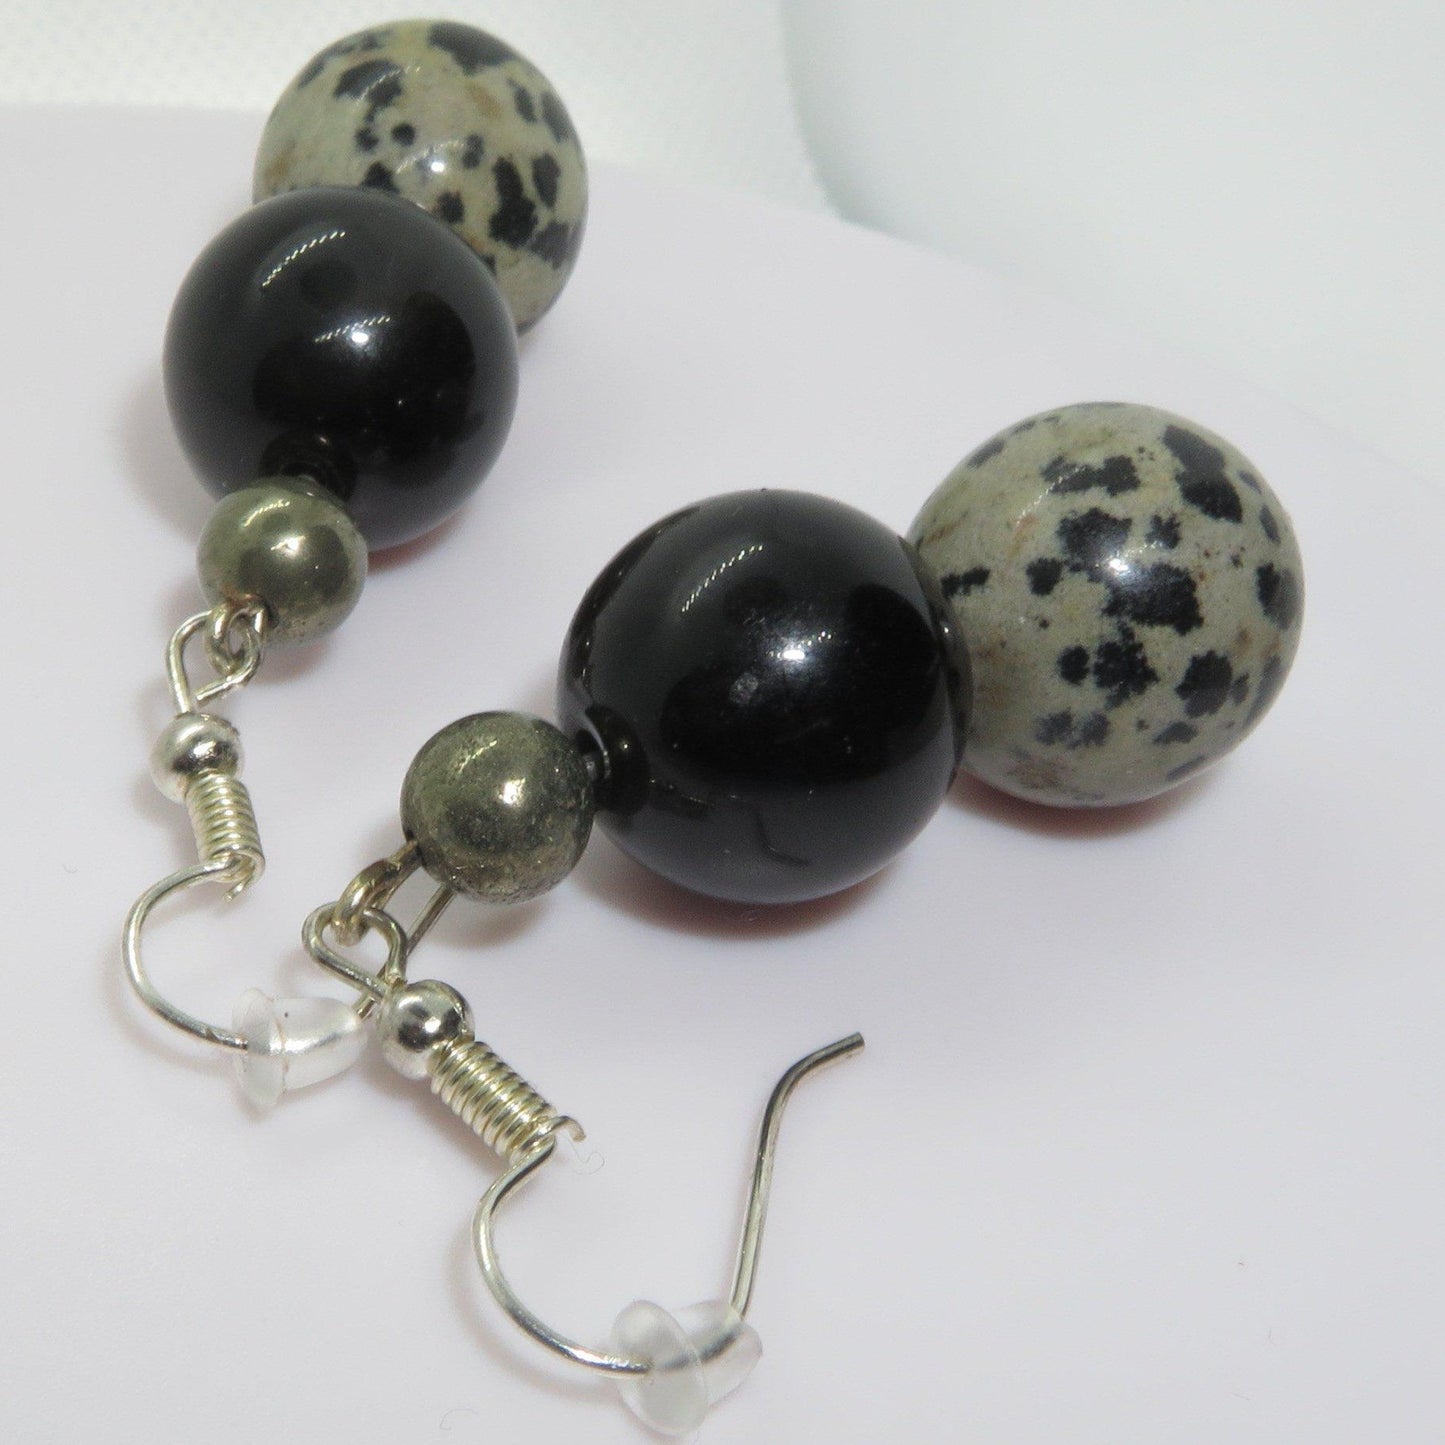 Earrings of Obsidian, pyrite and dalmation stone